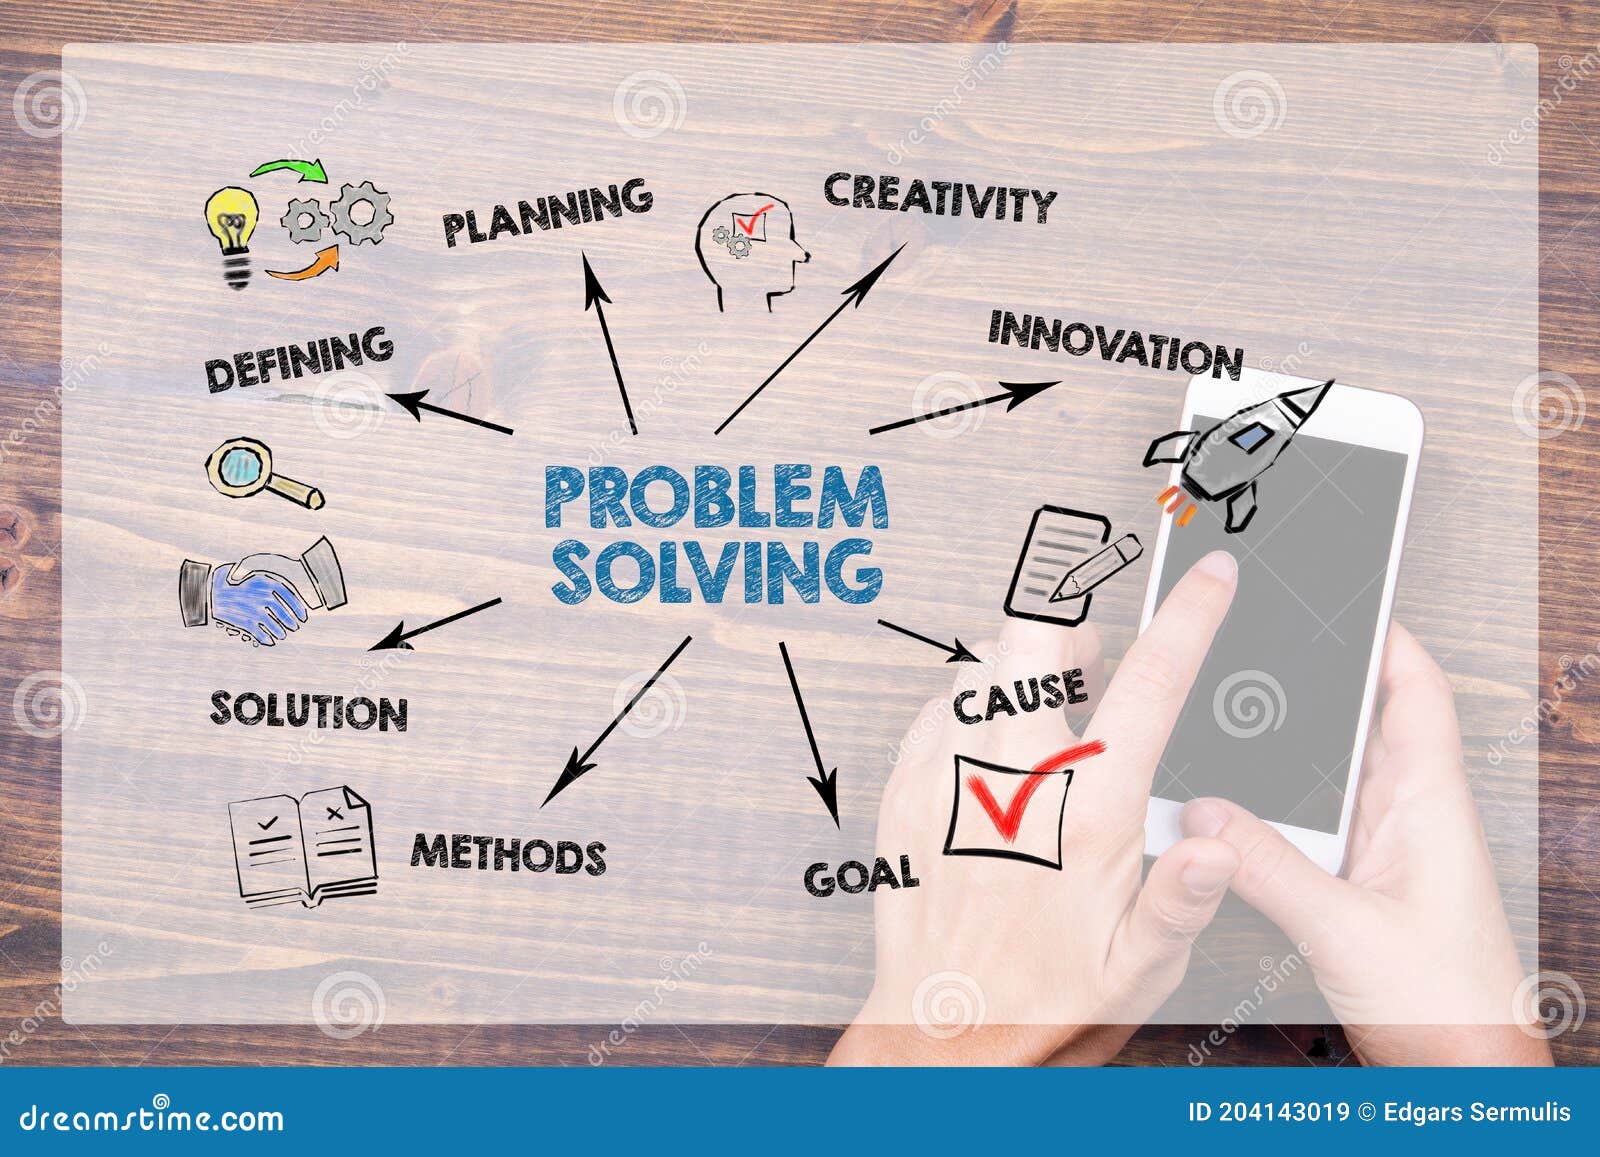 problem solving innovation and creativity